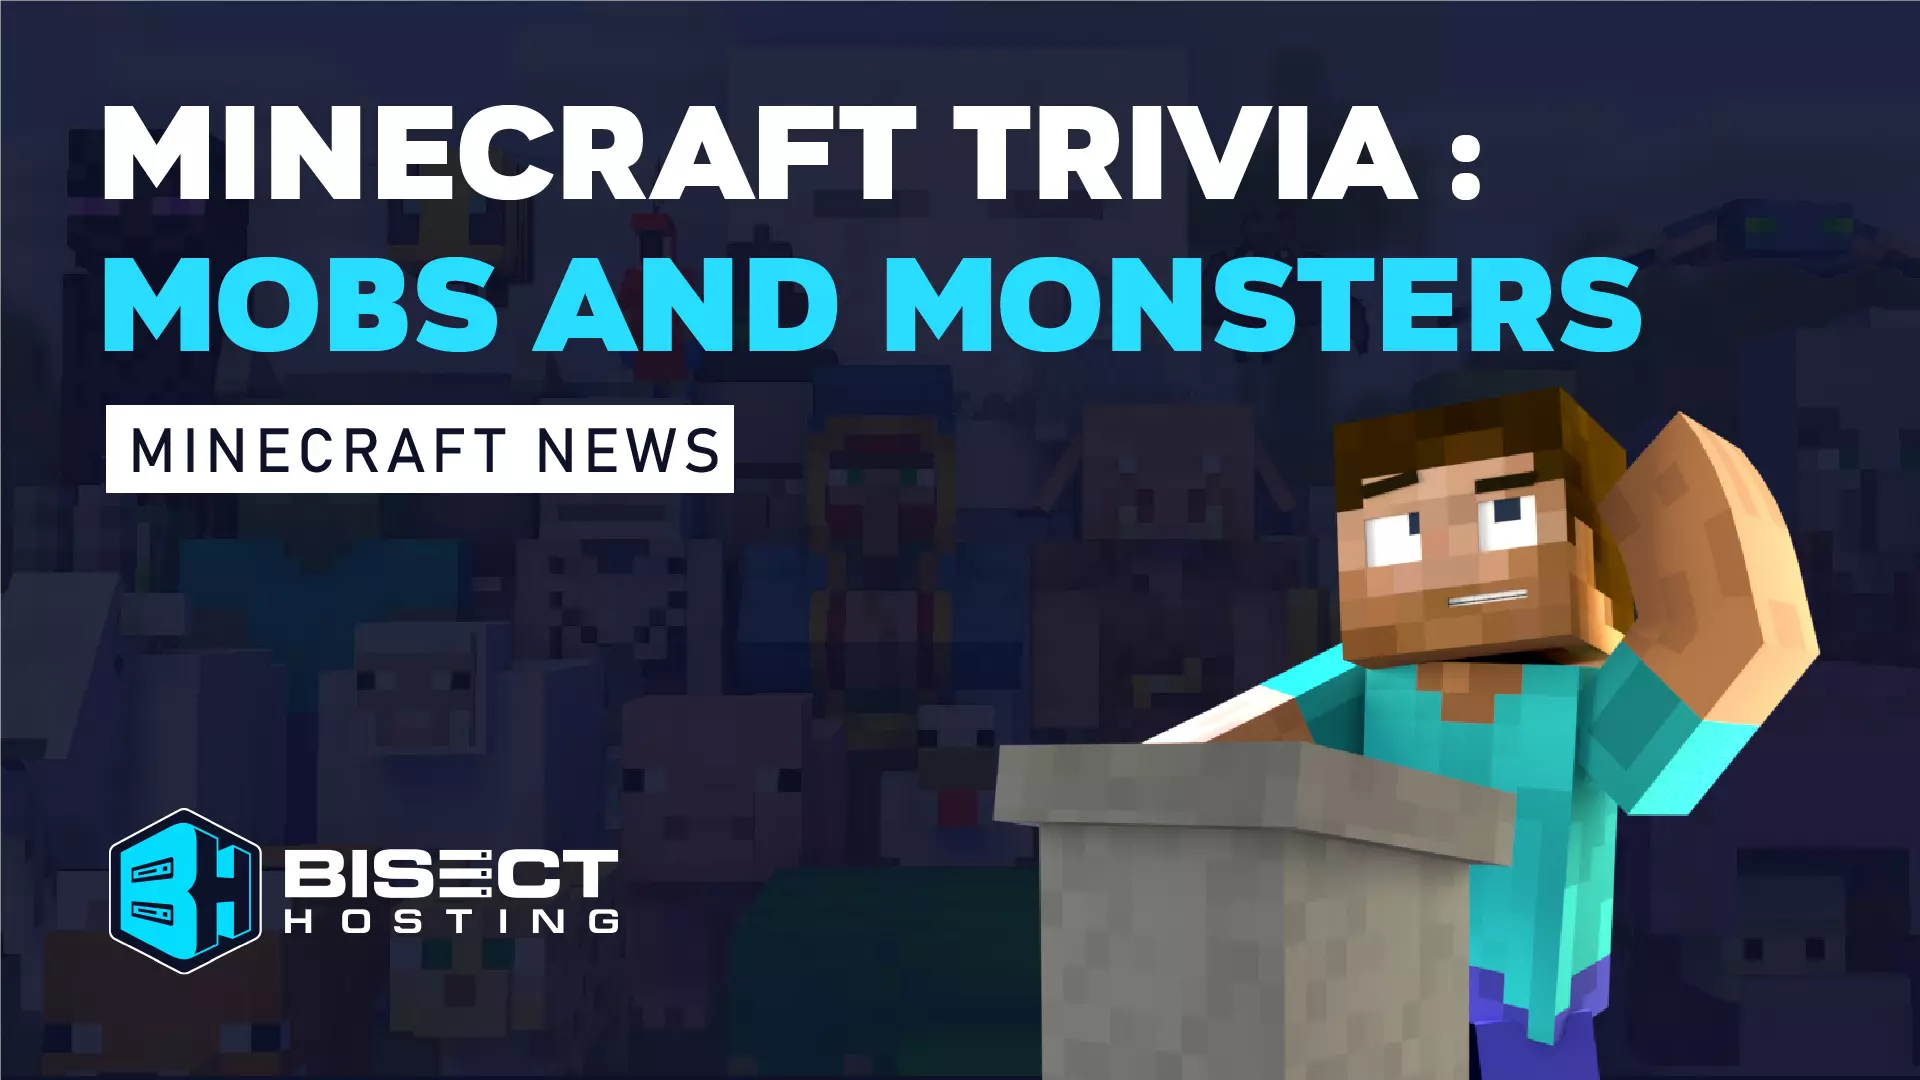 Minecraft Trivia: Mobs and Monsters